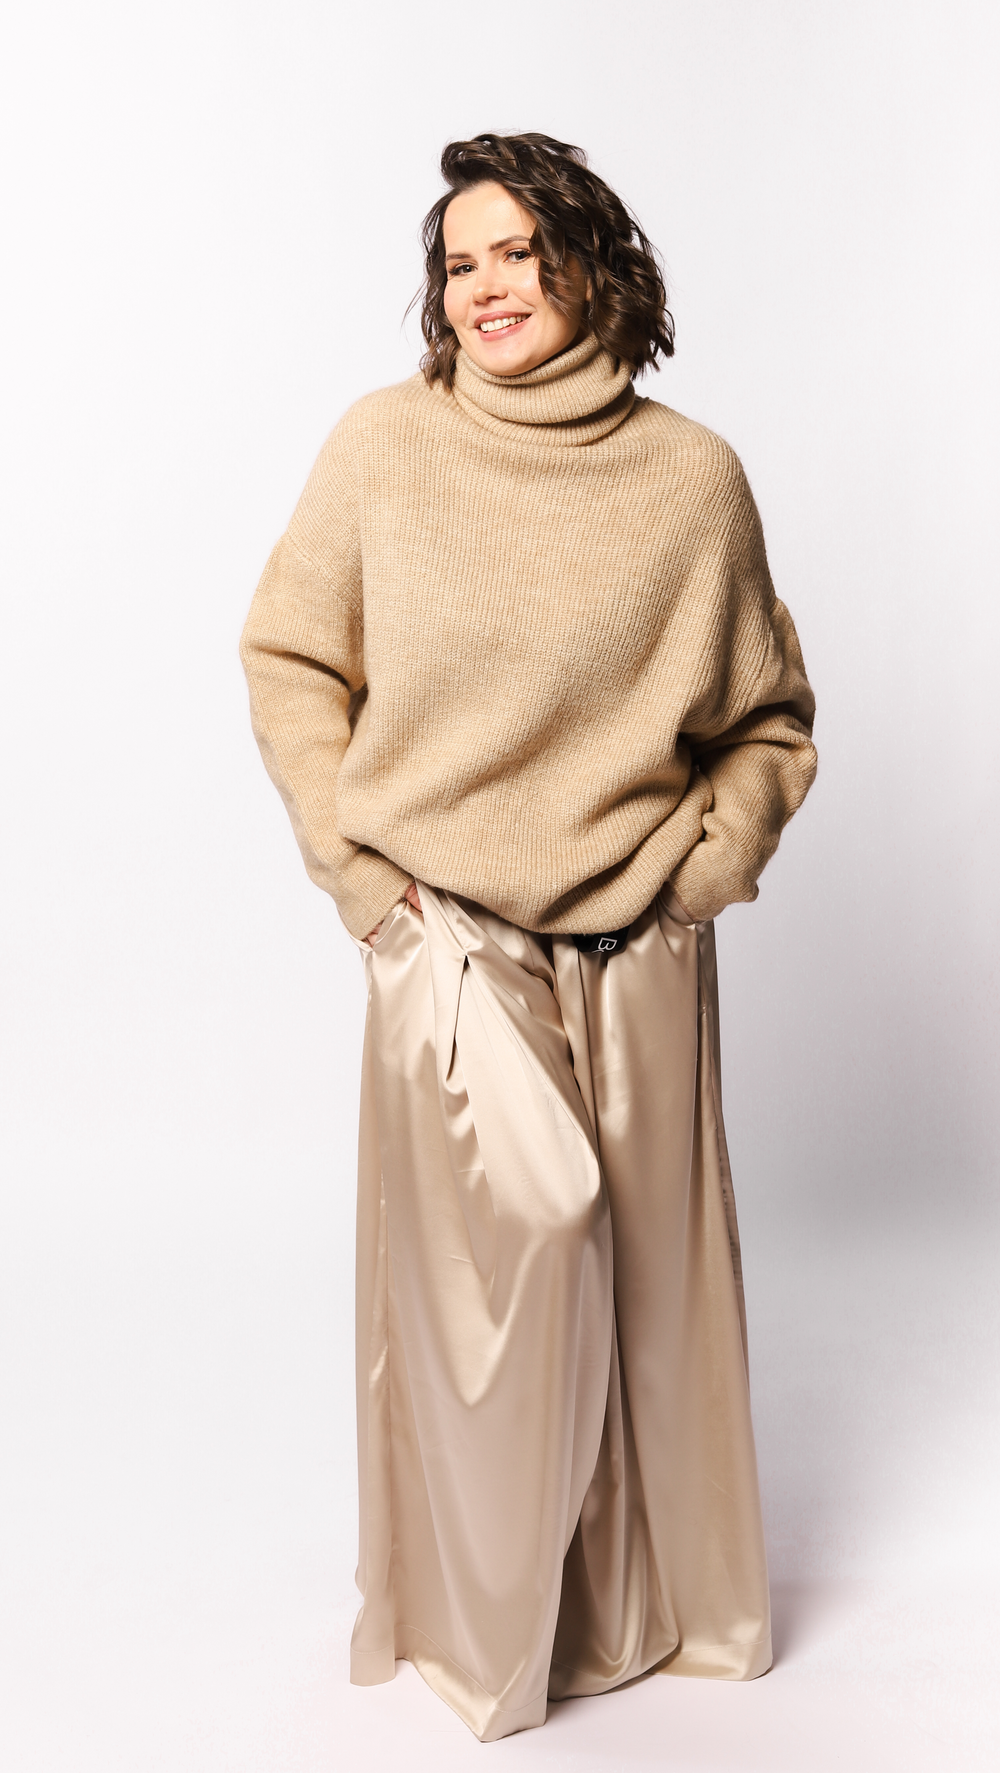 Oversized turtleneck sweater "Beige" BeaA - Be At Home with Yourself